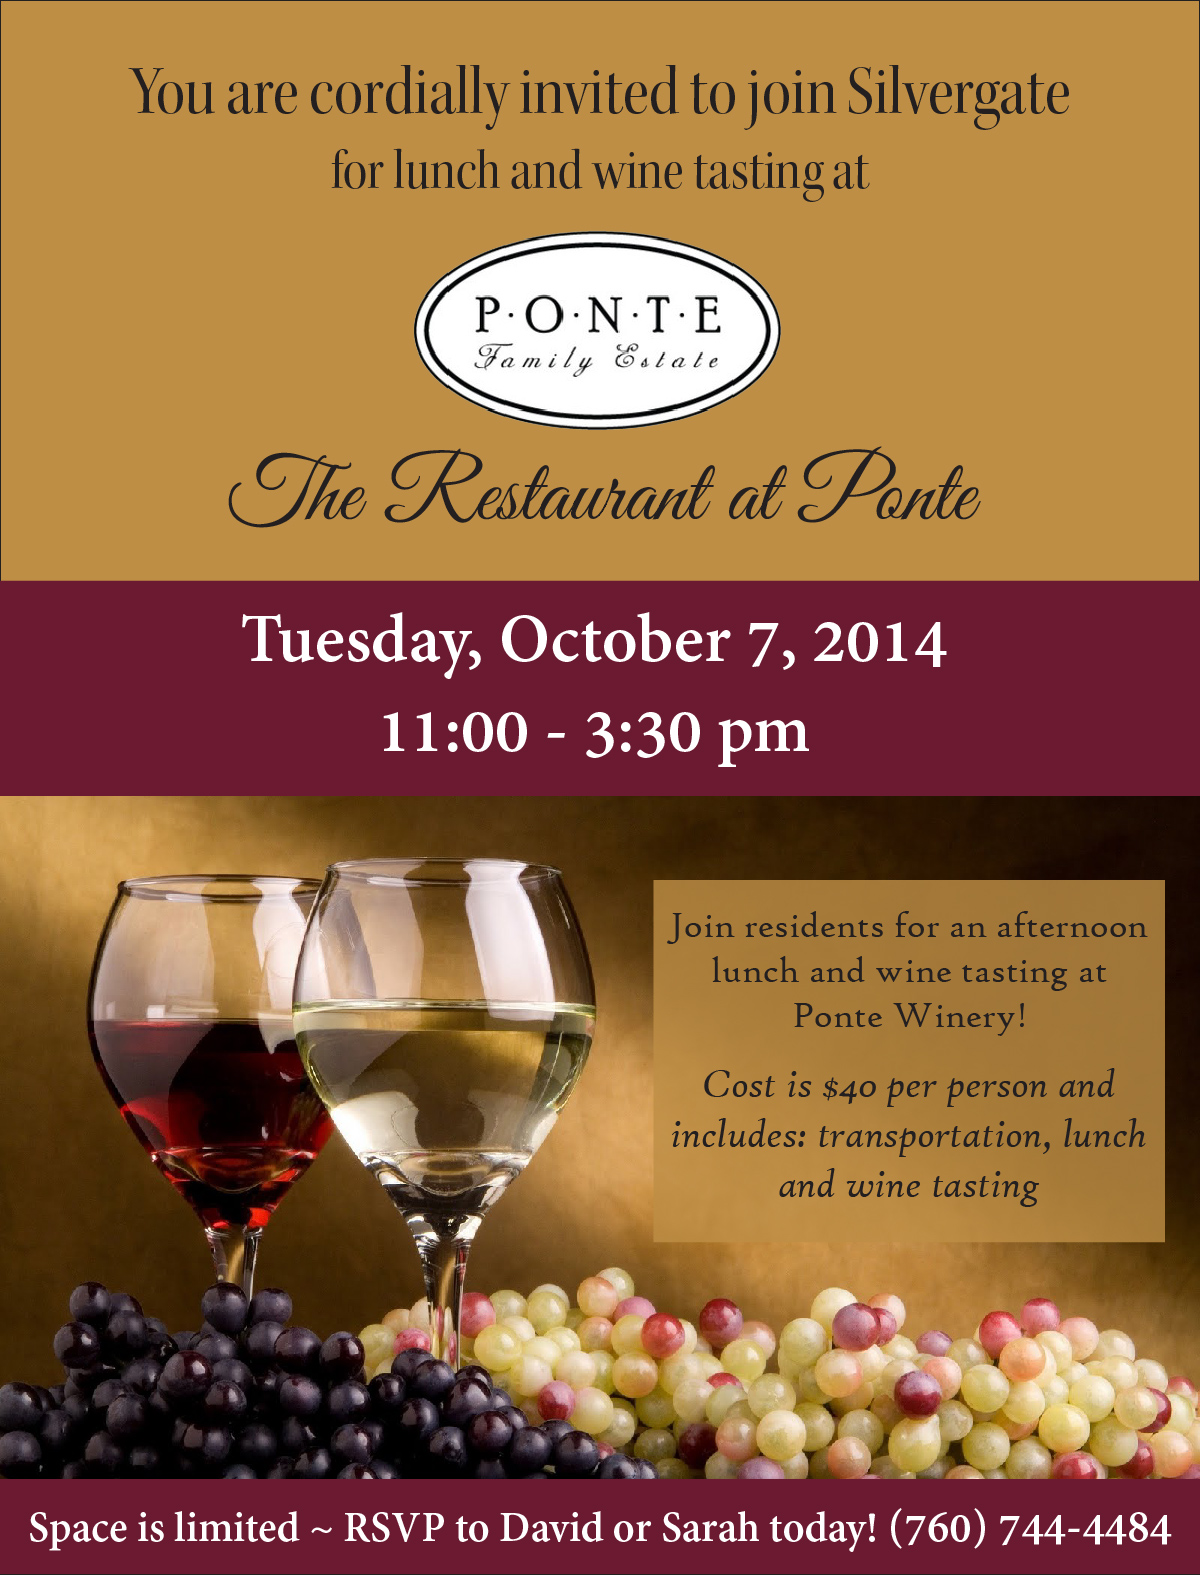 Join Silvergate for lunch and wine tasting at Ponte